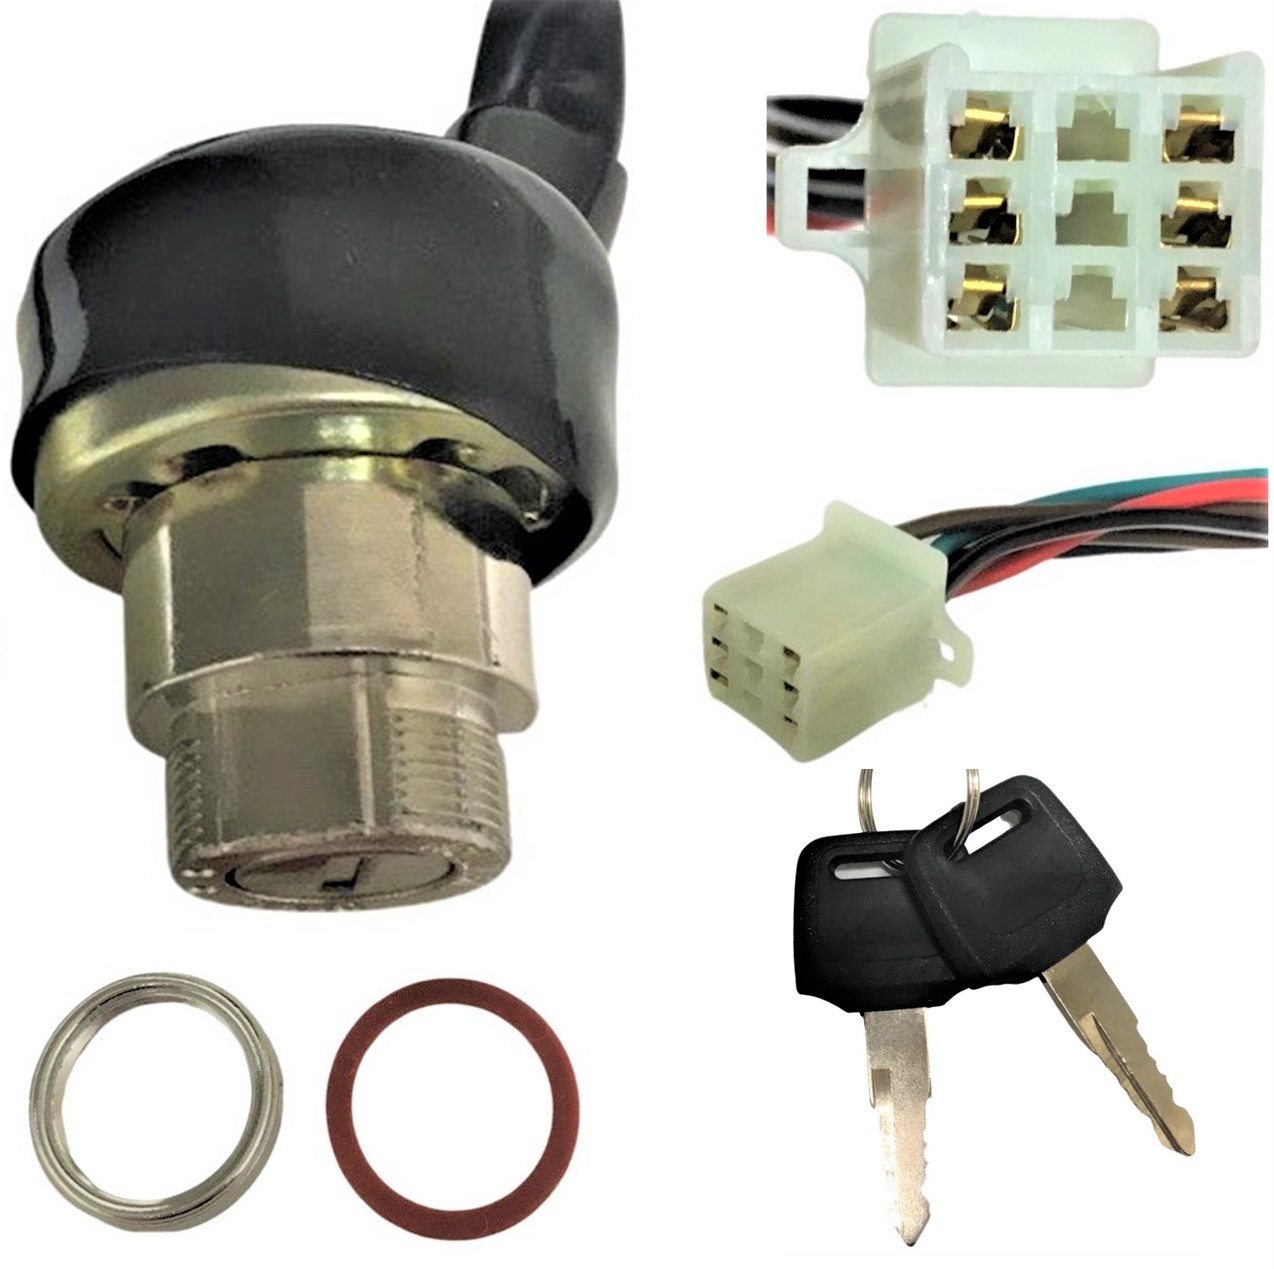 Ignition Switch Fits Many 70-110cc ATVs 6 pins in 9 pin Male Jack - Click Image to Close